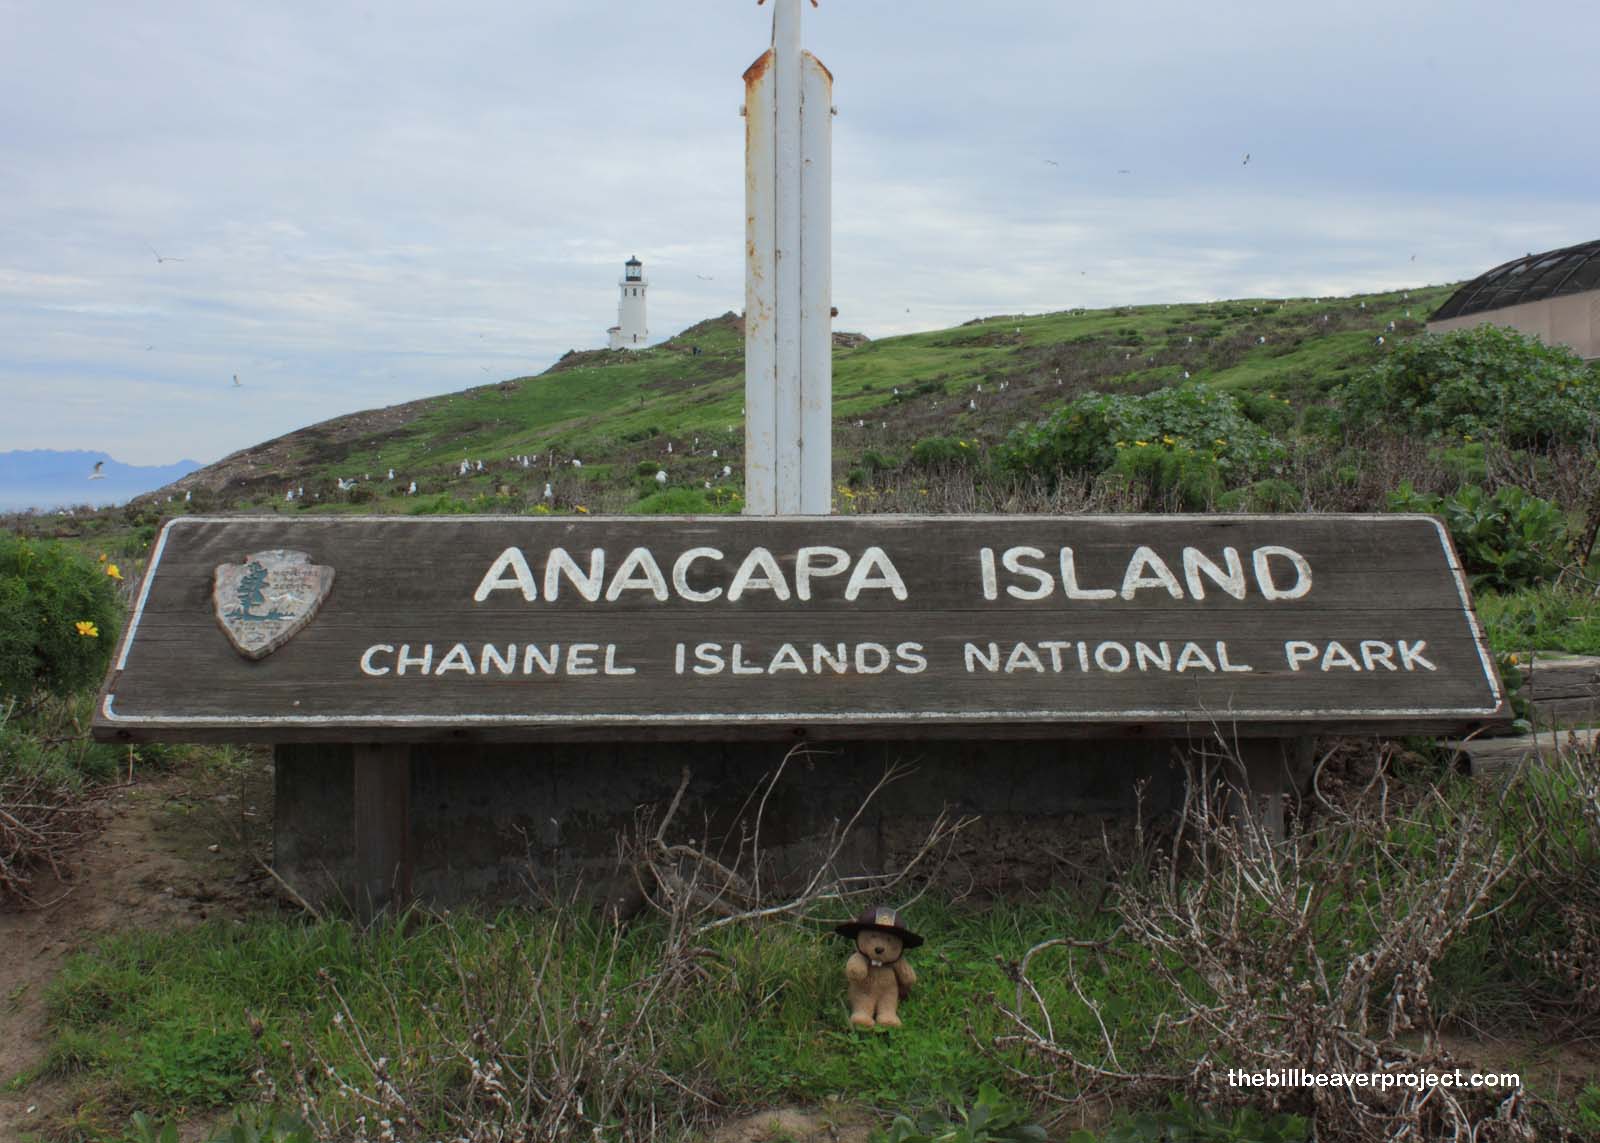 Channel Islands National Park: Anacapa